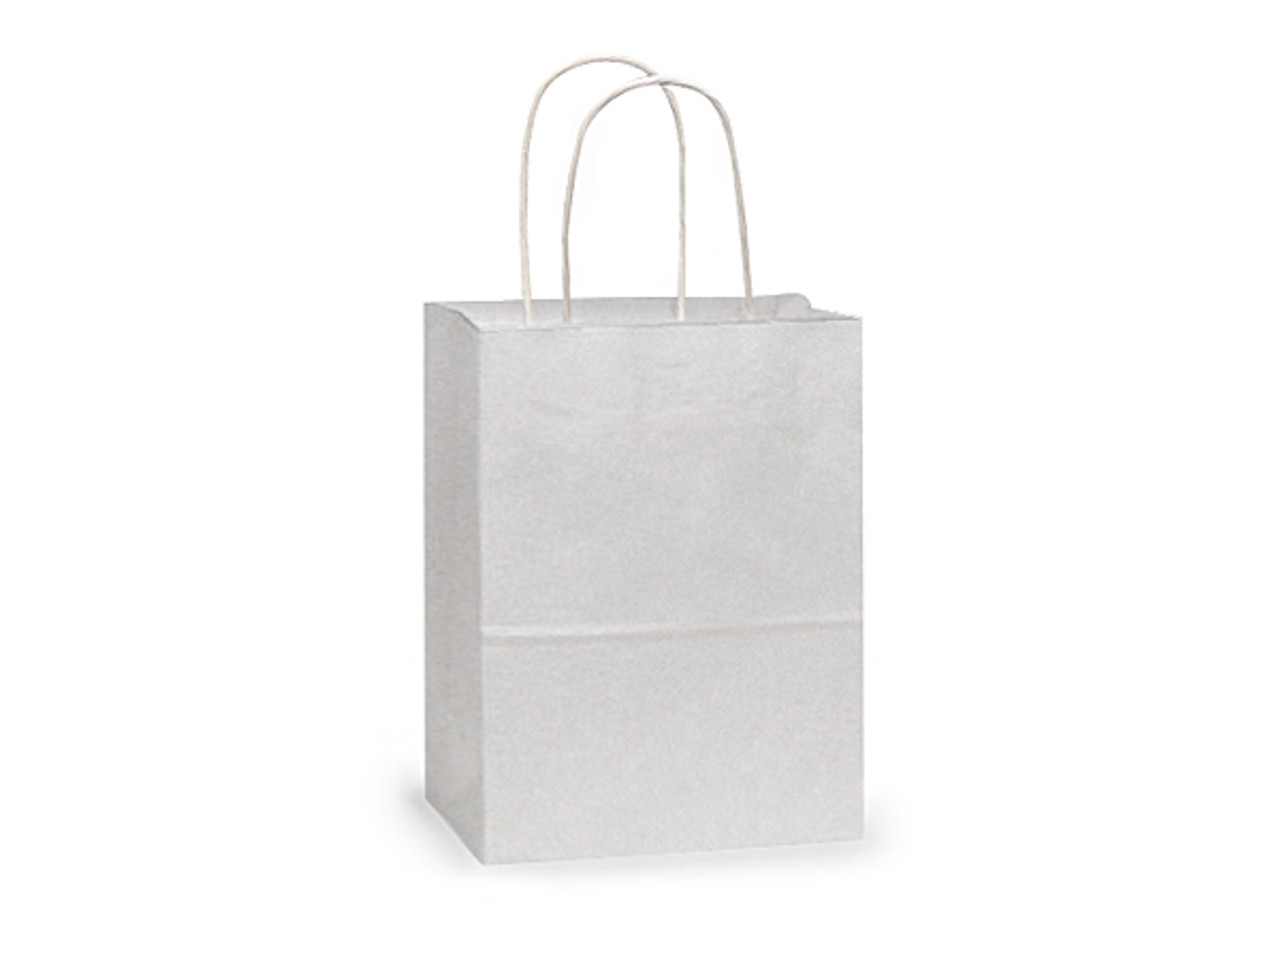 Prime 5-1/2" x 3" x 8-3/4" 40% Recycled Matte White Paper Shopping Bags